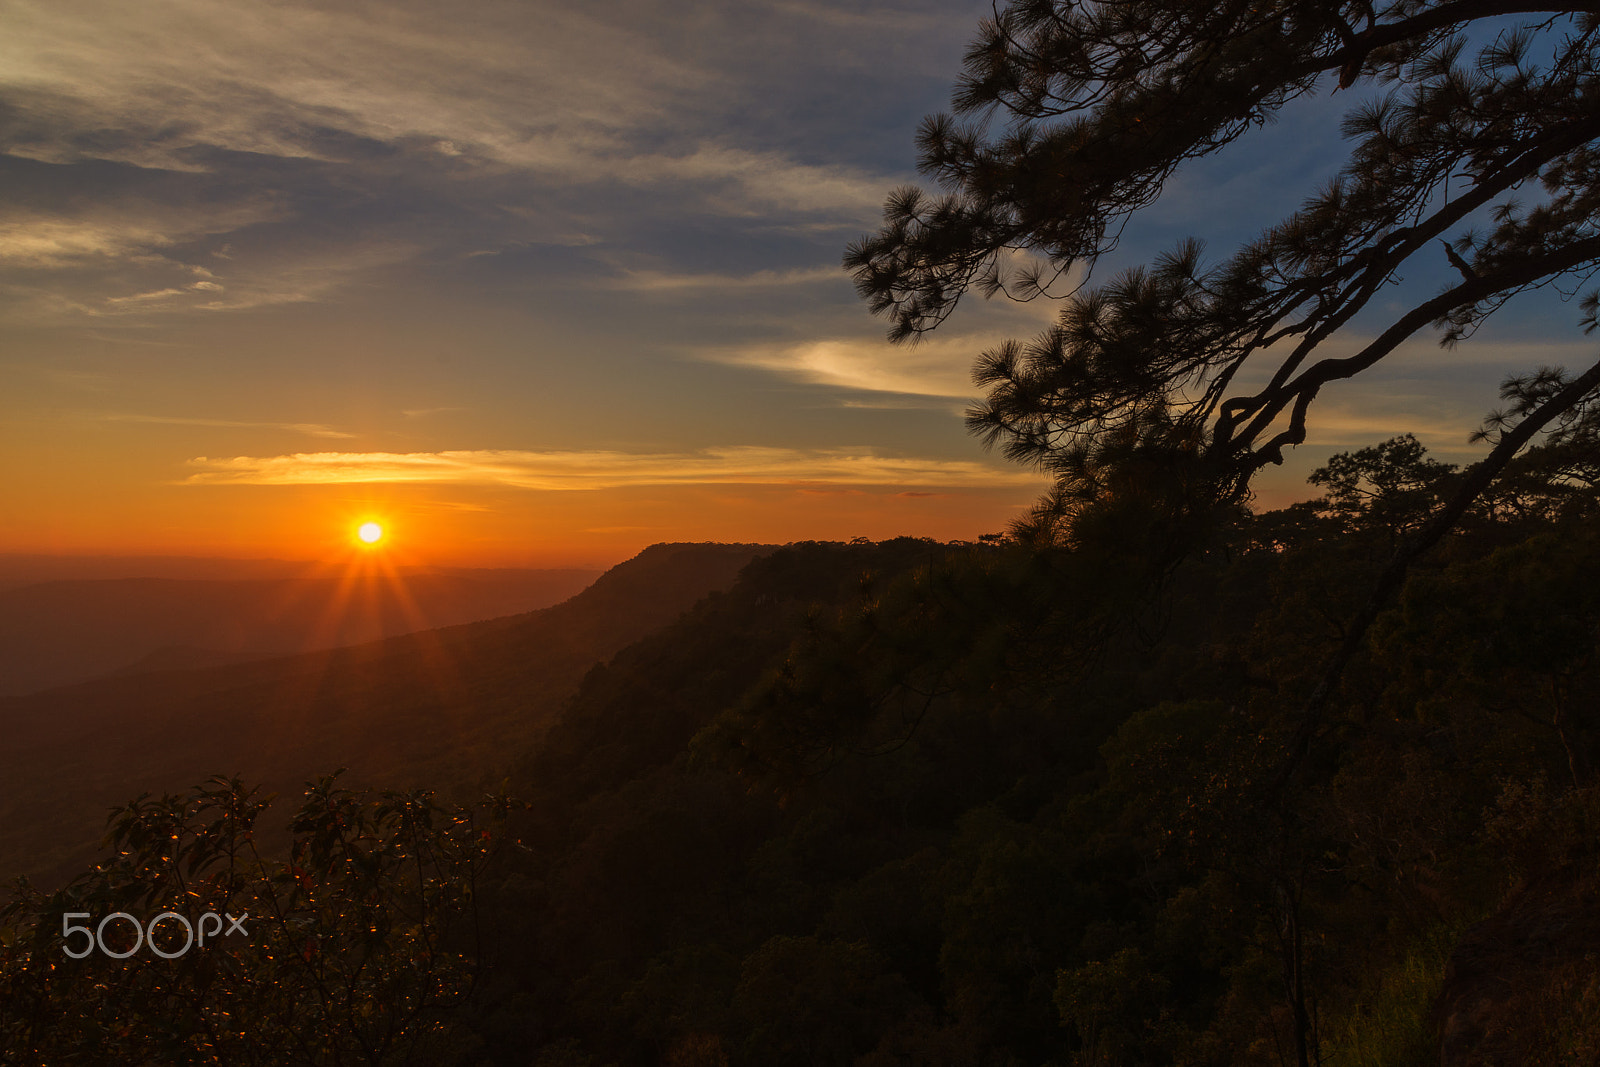 Nikon D5200 + Sigma 17-70mm F2.8-4 DC Macro OS HSM | C sample photo. Sunset cliff and pine branches. photography